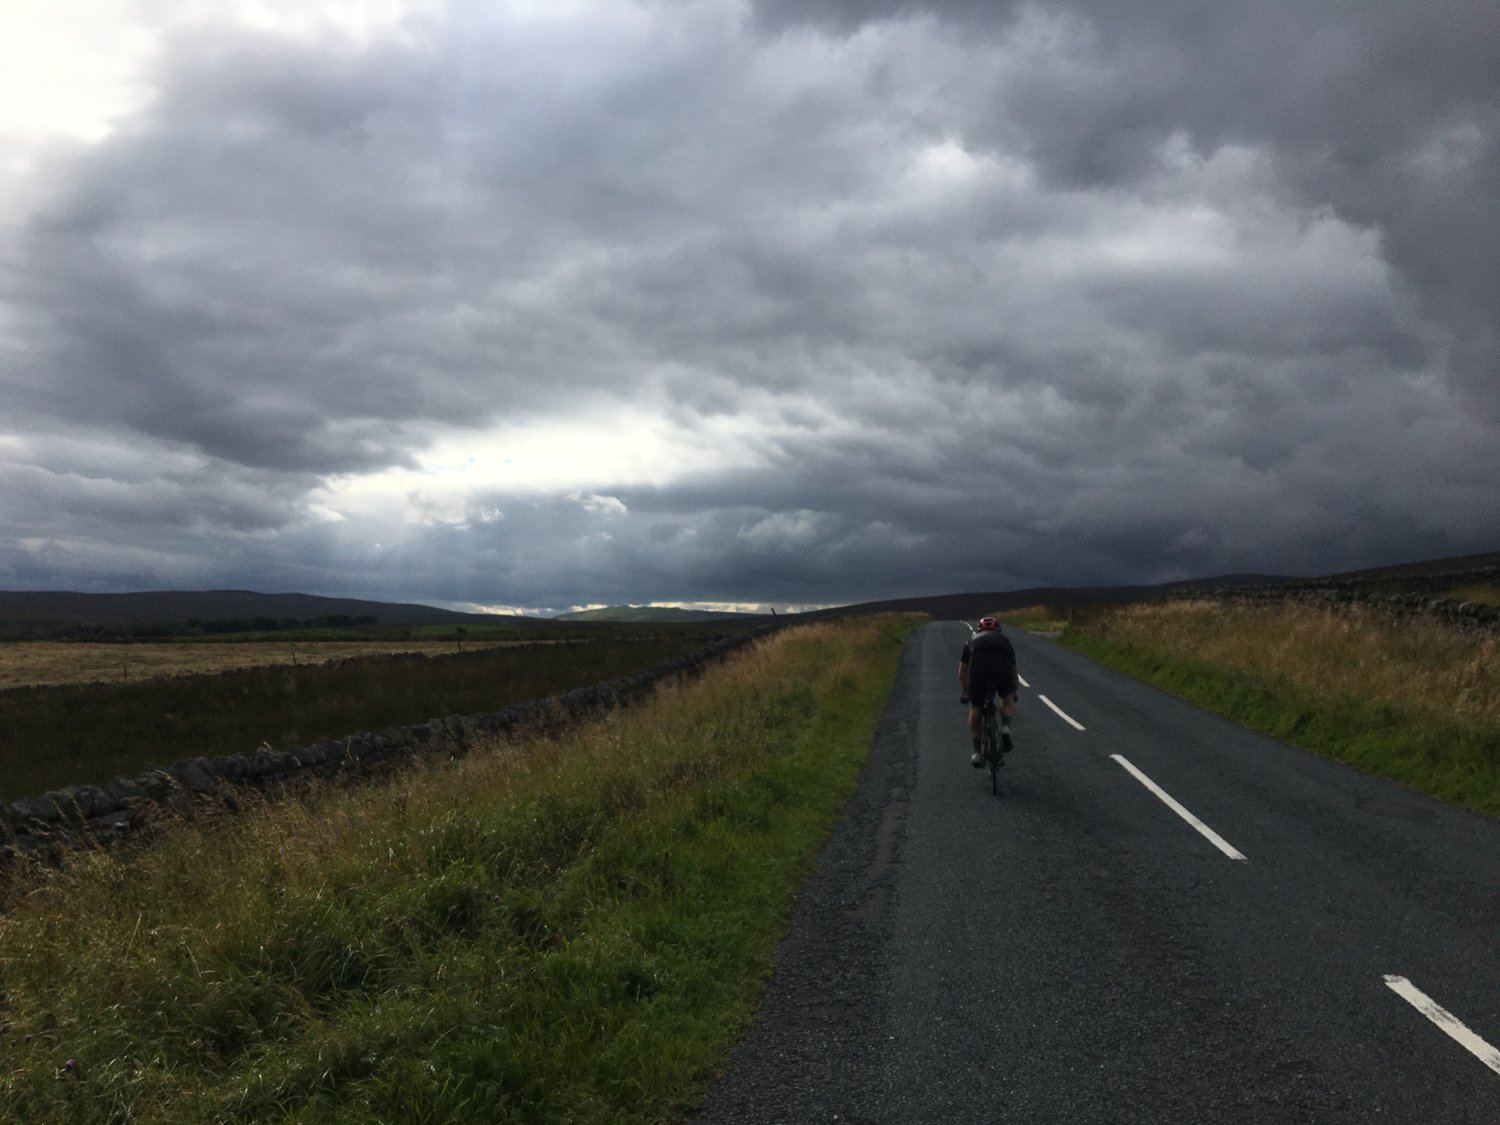 riding into the storm